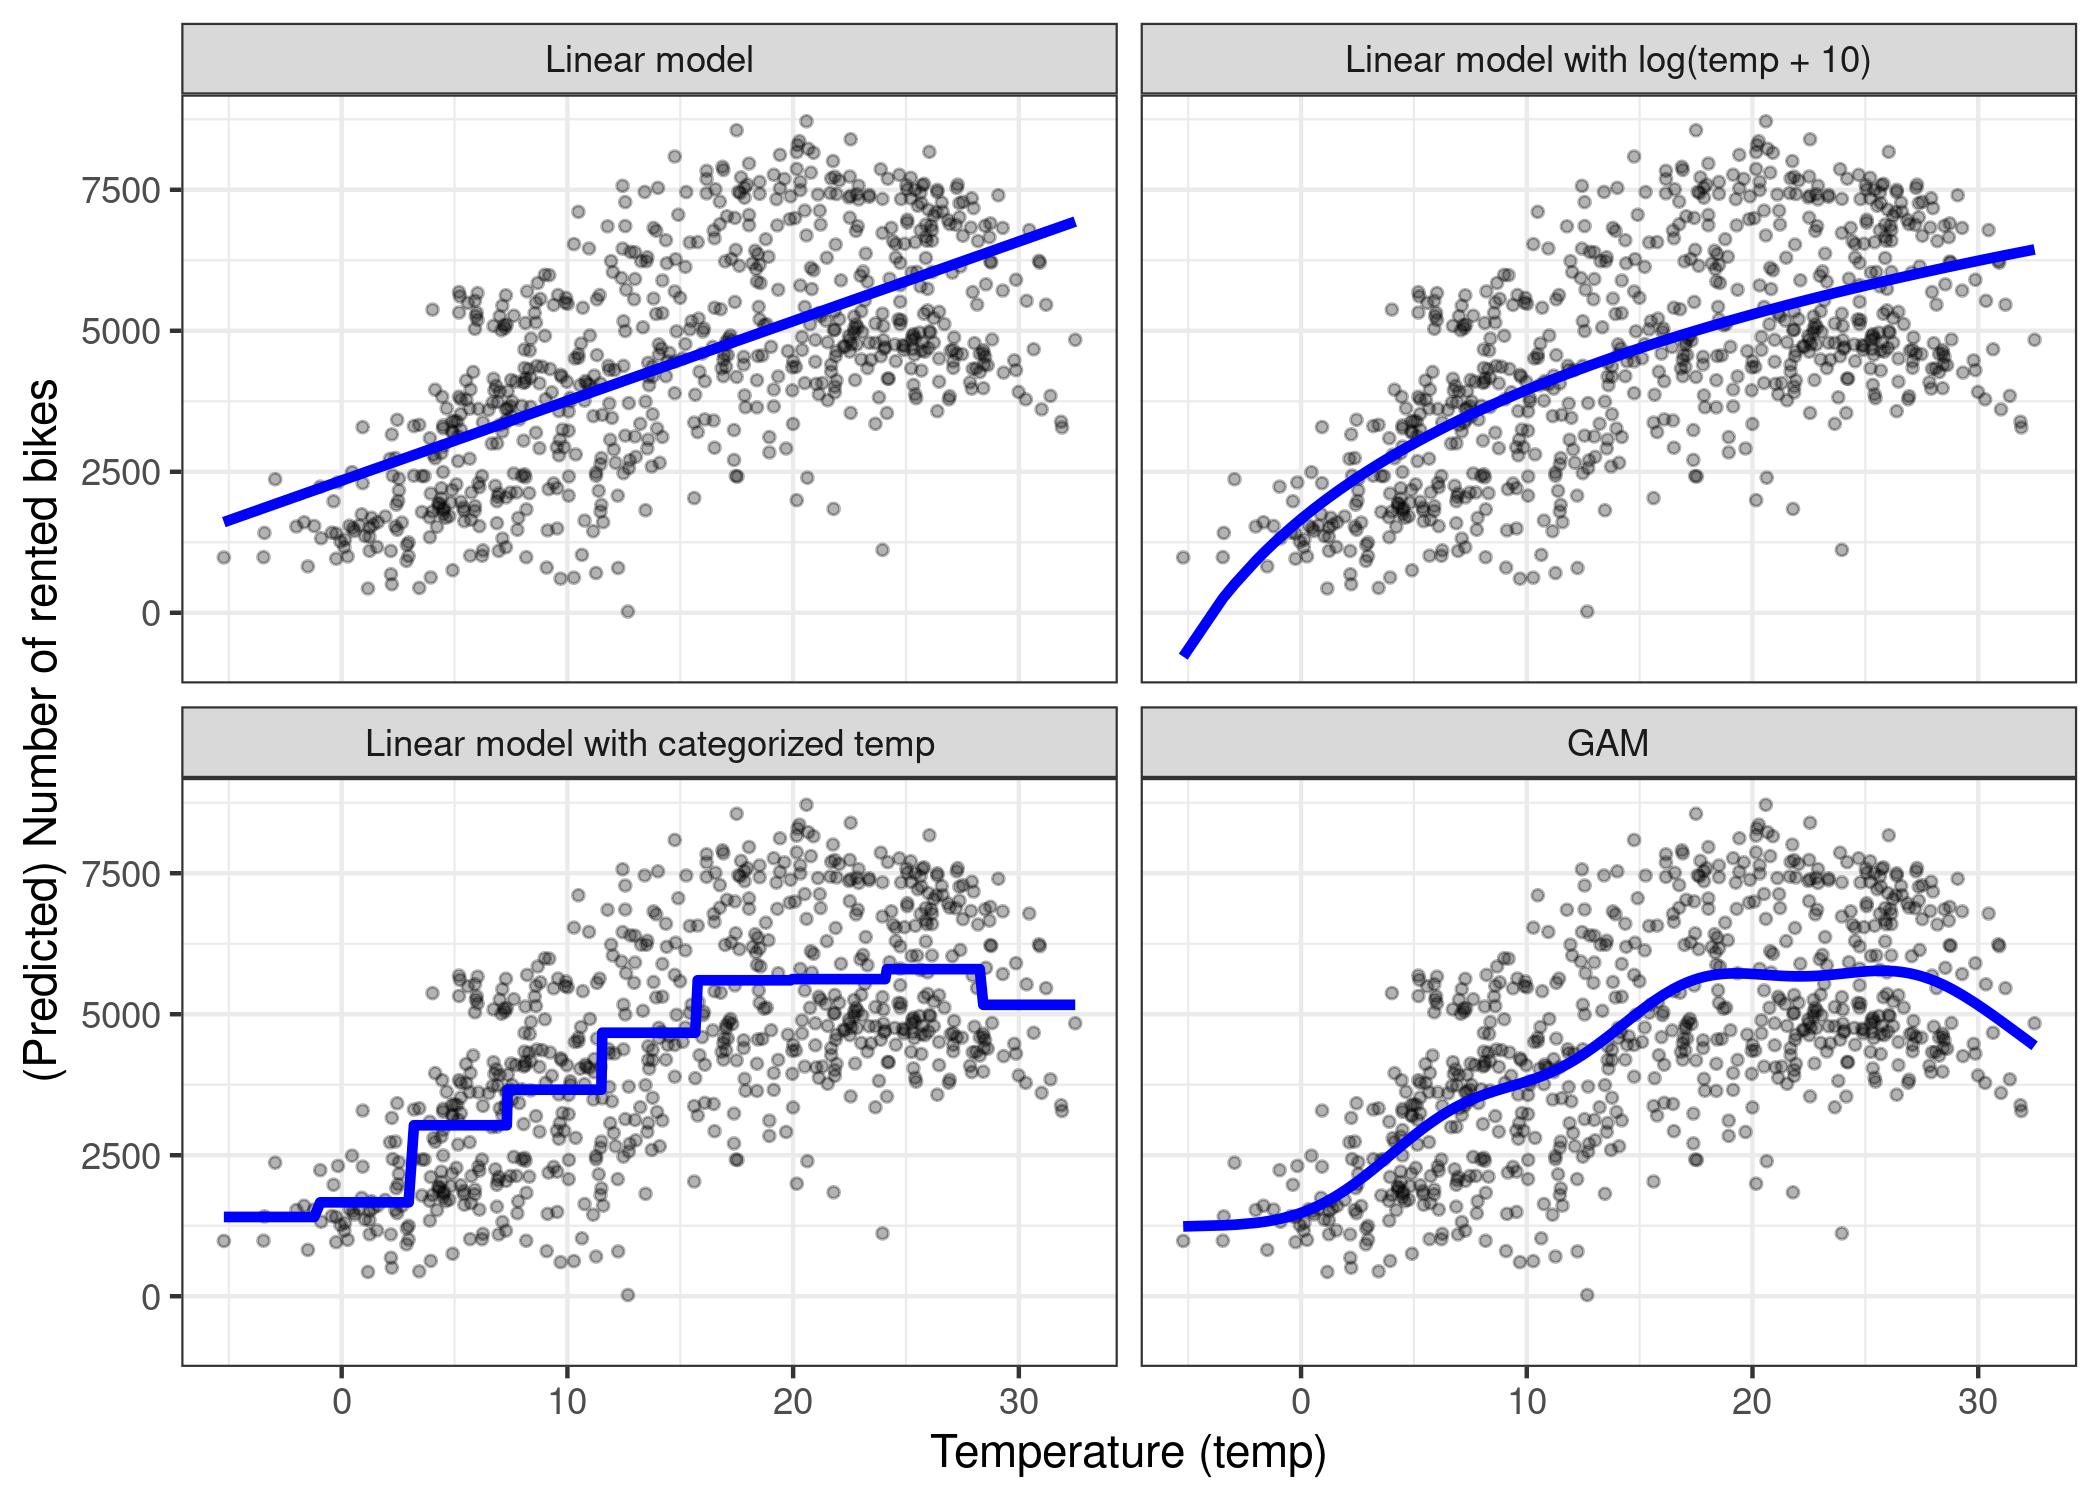 Predicting the number of rented bicycles using only the temperature feature. A linear model (top left) does not fit the data well. One solution is to transform the feature with e.g. the logarithm (top right), categorize it (bottom left), which is usually a bad decision, or use Generalized Additive Models that can automatically fit a smooth curve for temperature (bottom right).